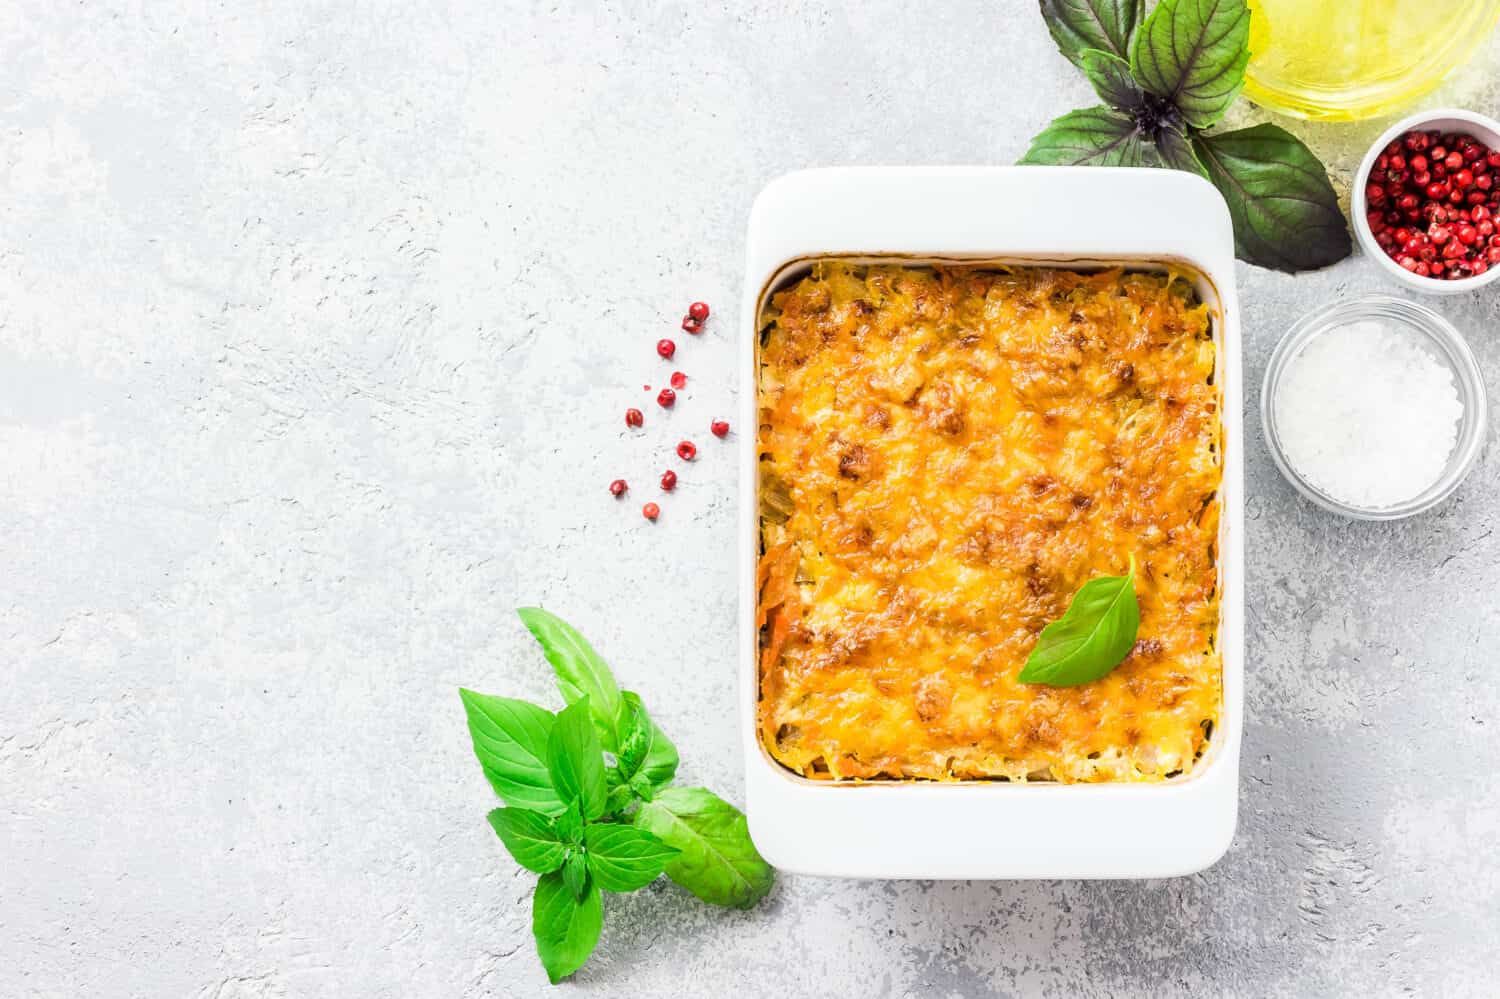 Cheesy stuffed cabbage casserole on concrete background. Top view, space for text.